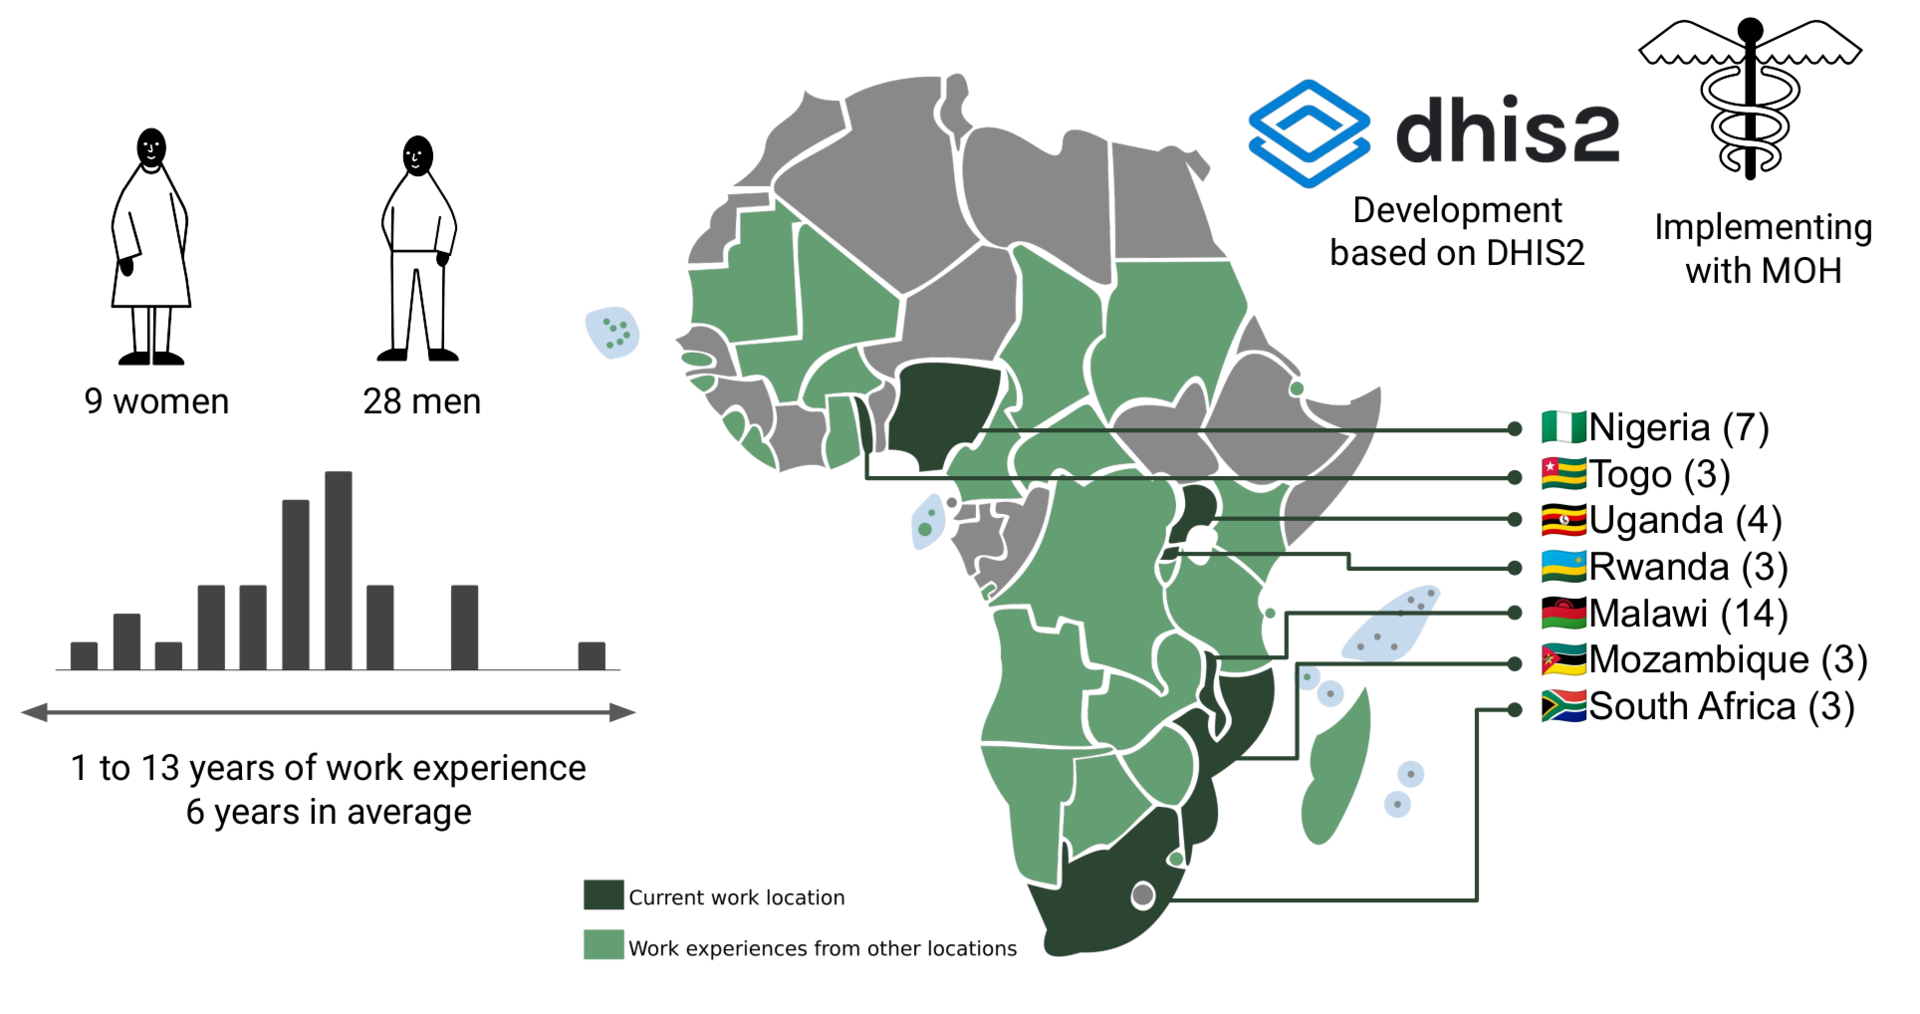 The participants in this study were 37 eHealth designers, 9 women and 28 men, working in 7 African countries; Malawi (14), Mozambique (3), Nigeria (7), Rwanda (3), South Africa (3), Togo (3) and Uganda (4). Many of the participants also support eHealth design and implementation projects in other neighboring countries having experiences from design and implementation of eHealth solutions in also 34 other African countres. The eHealth designers are both juniors with only 1 year experience up to seniors with more than 13 years of work experience with design and implementation of eHealth solutions.